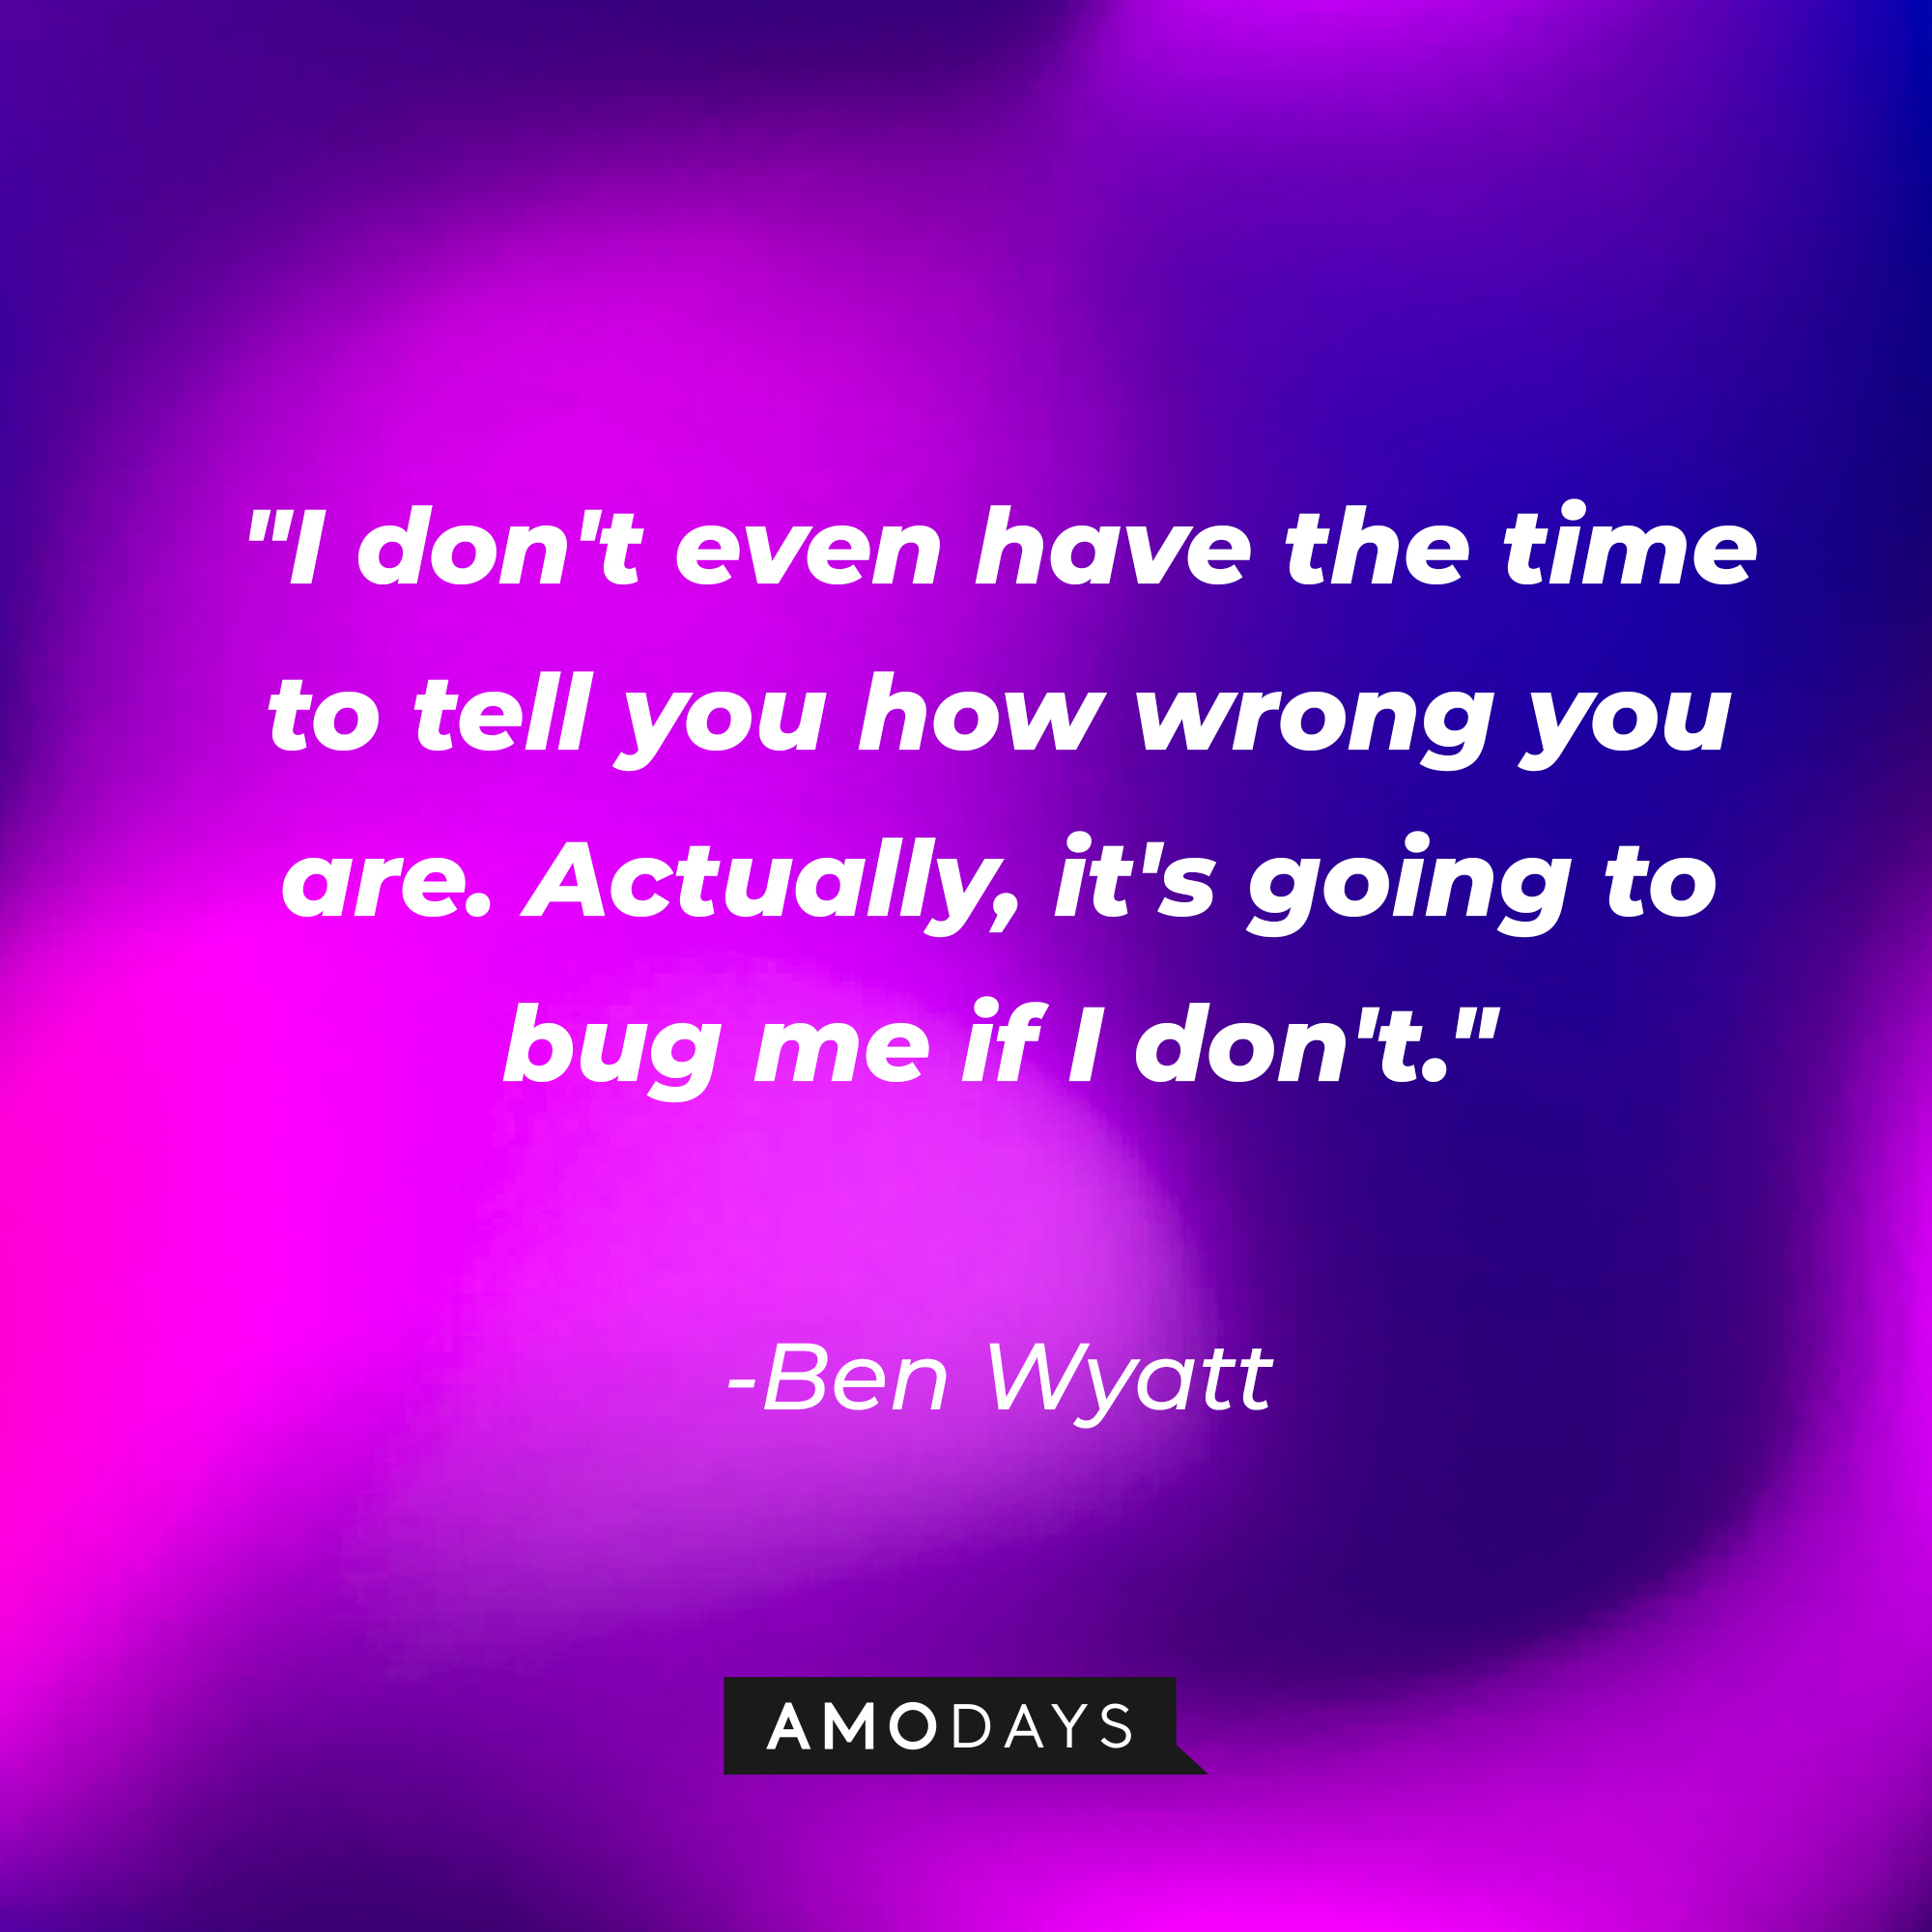 Ben Wyatt's quote: "I don't even have the time to tell you how wrong you are. Actually, it's going to bug me if I don't." | Source: AmoDays